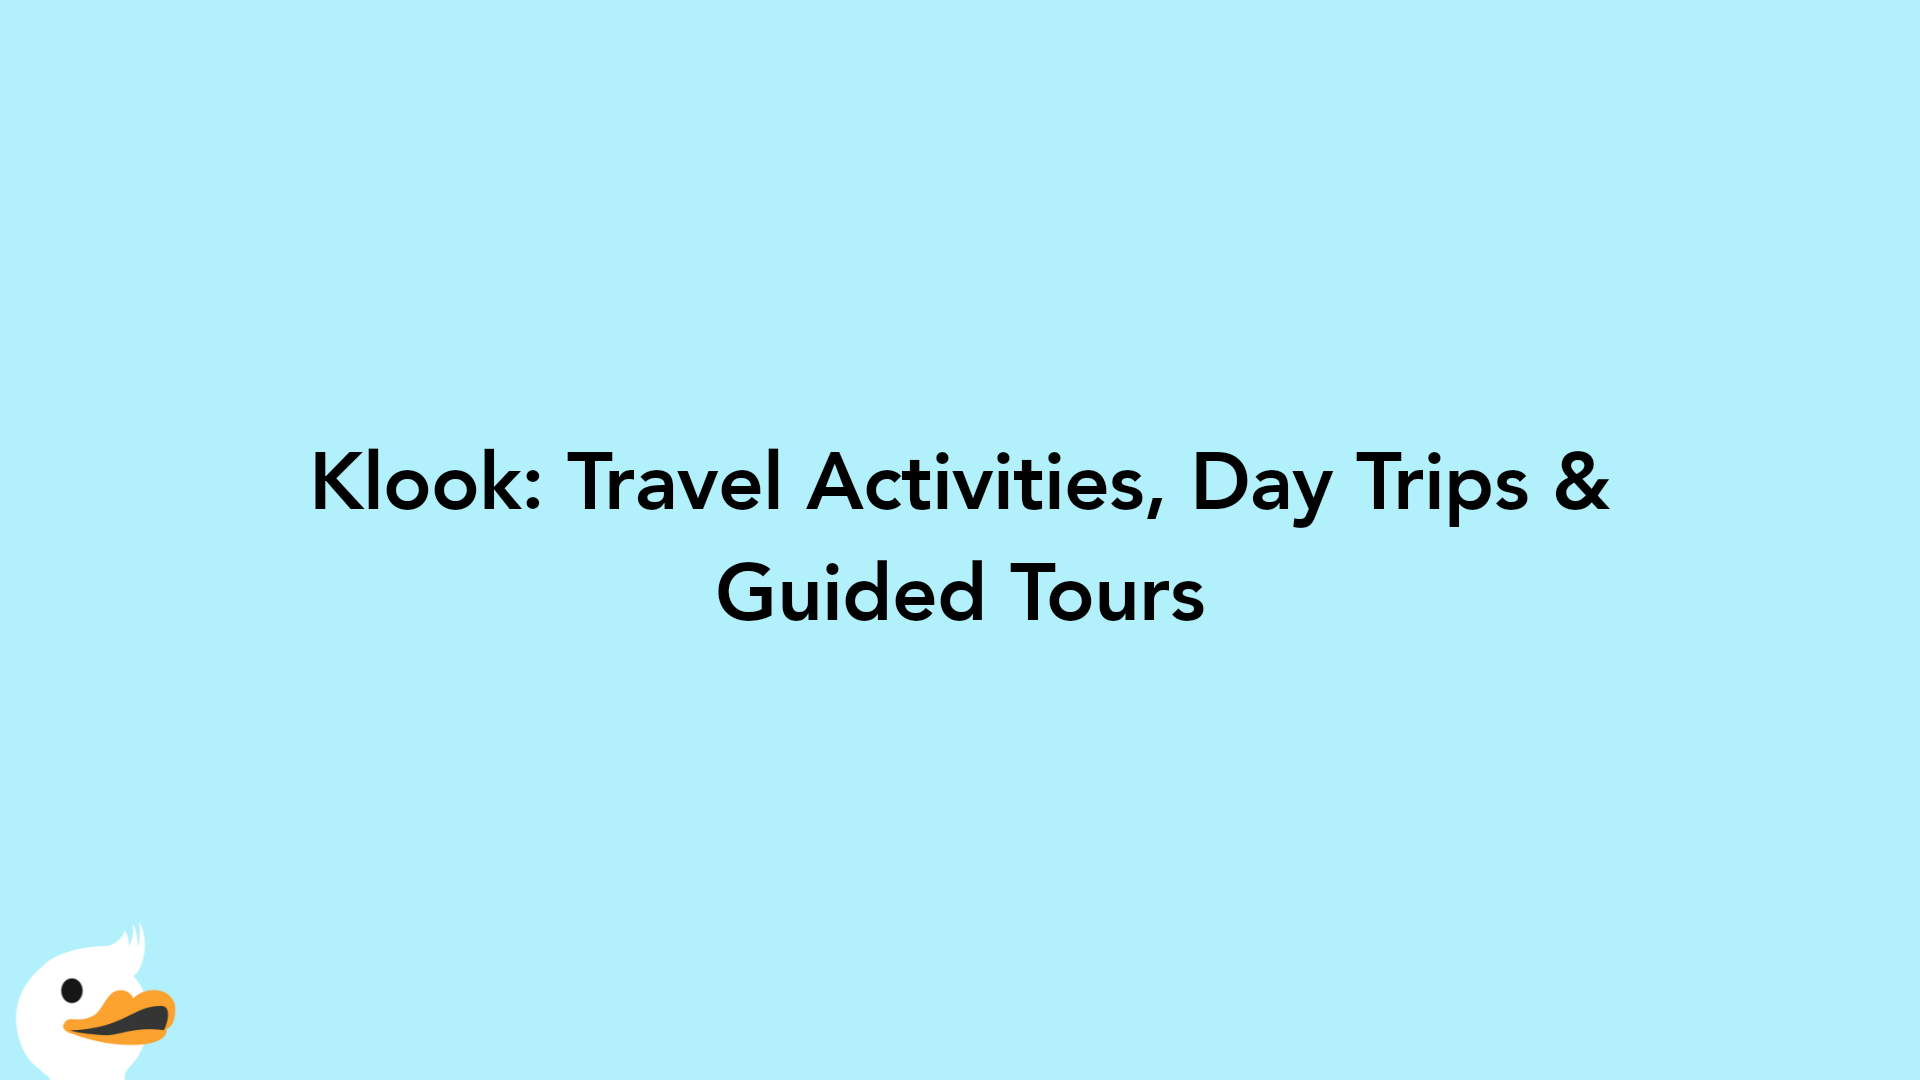 Klook: Travel Activities, Day Trips & Guided Tours